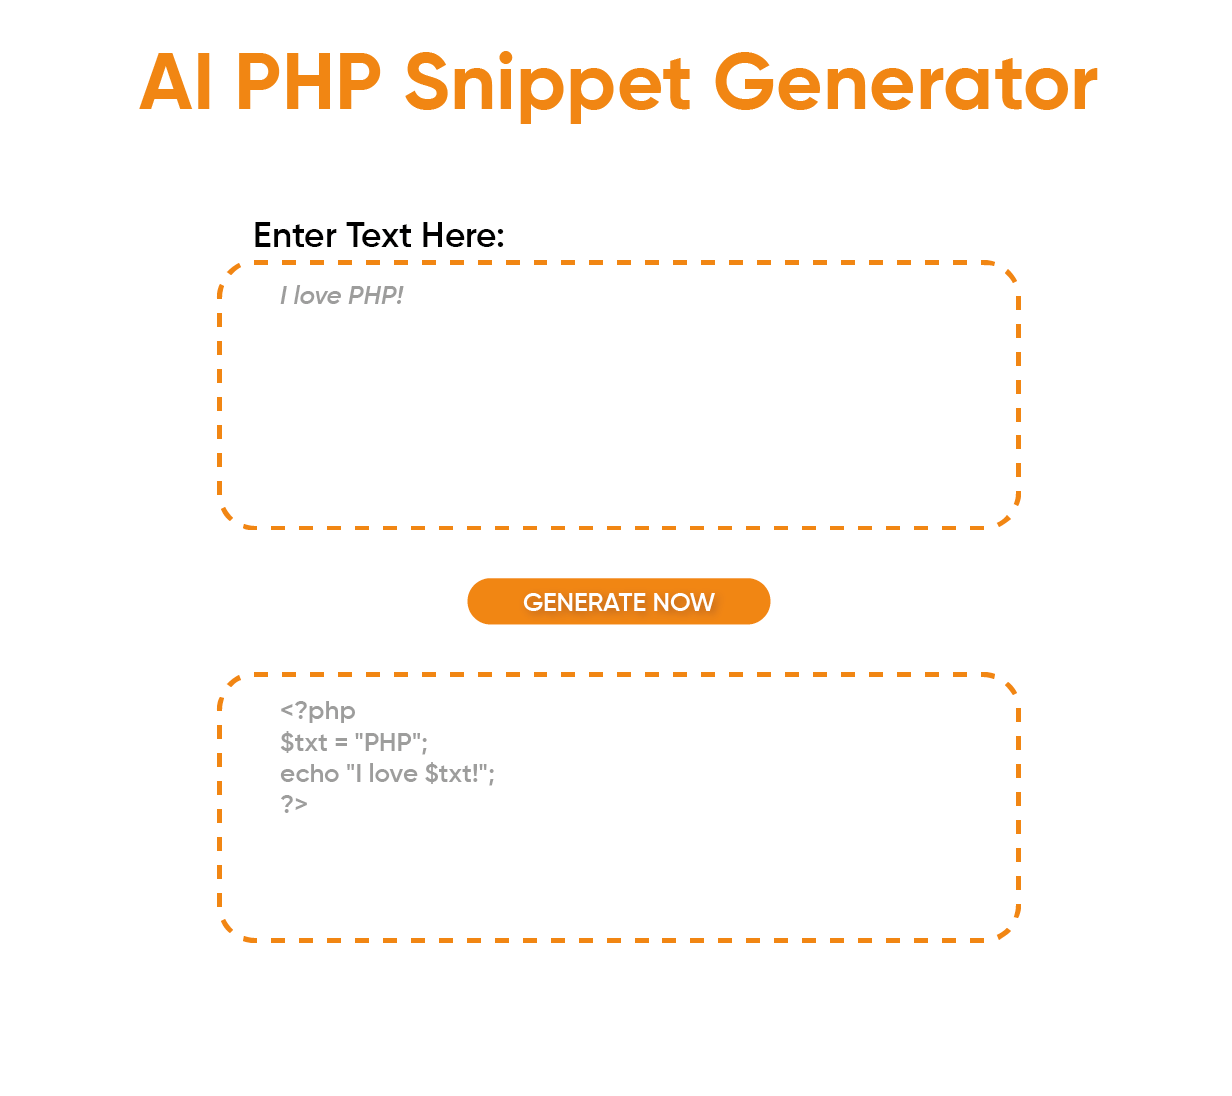 Why use Ettvi's AI PHP Snippet tool